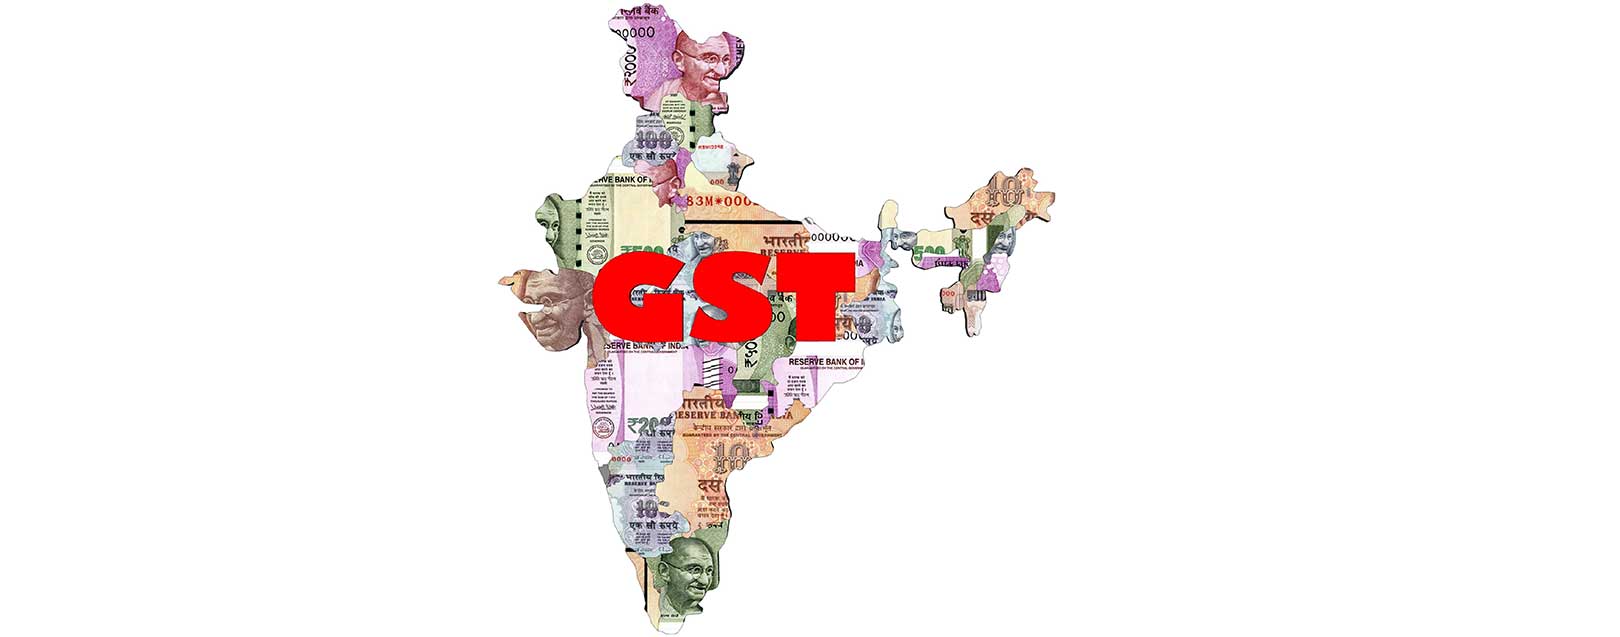 Treatment of exports under GST